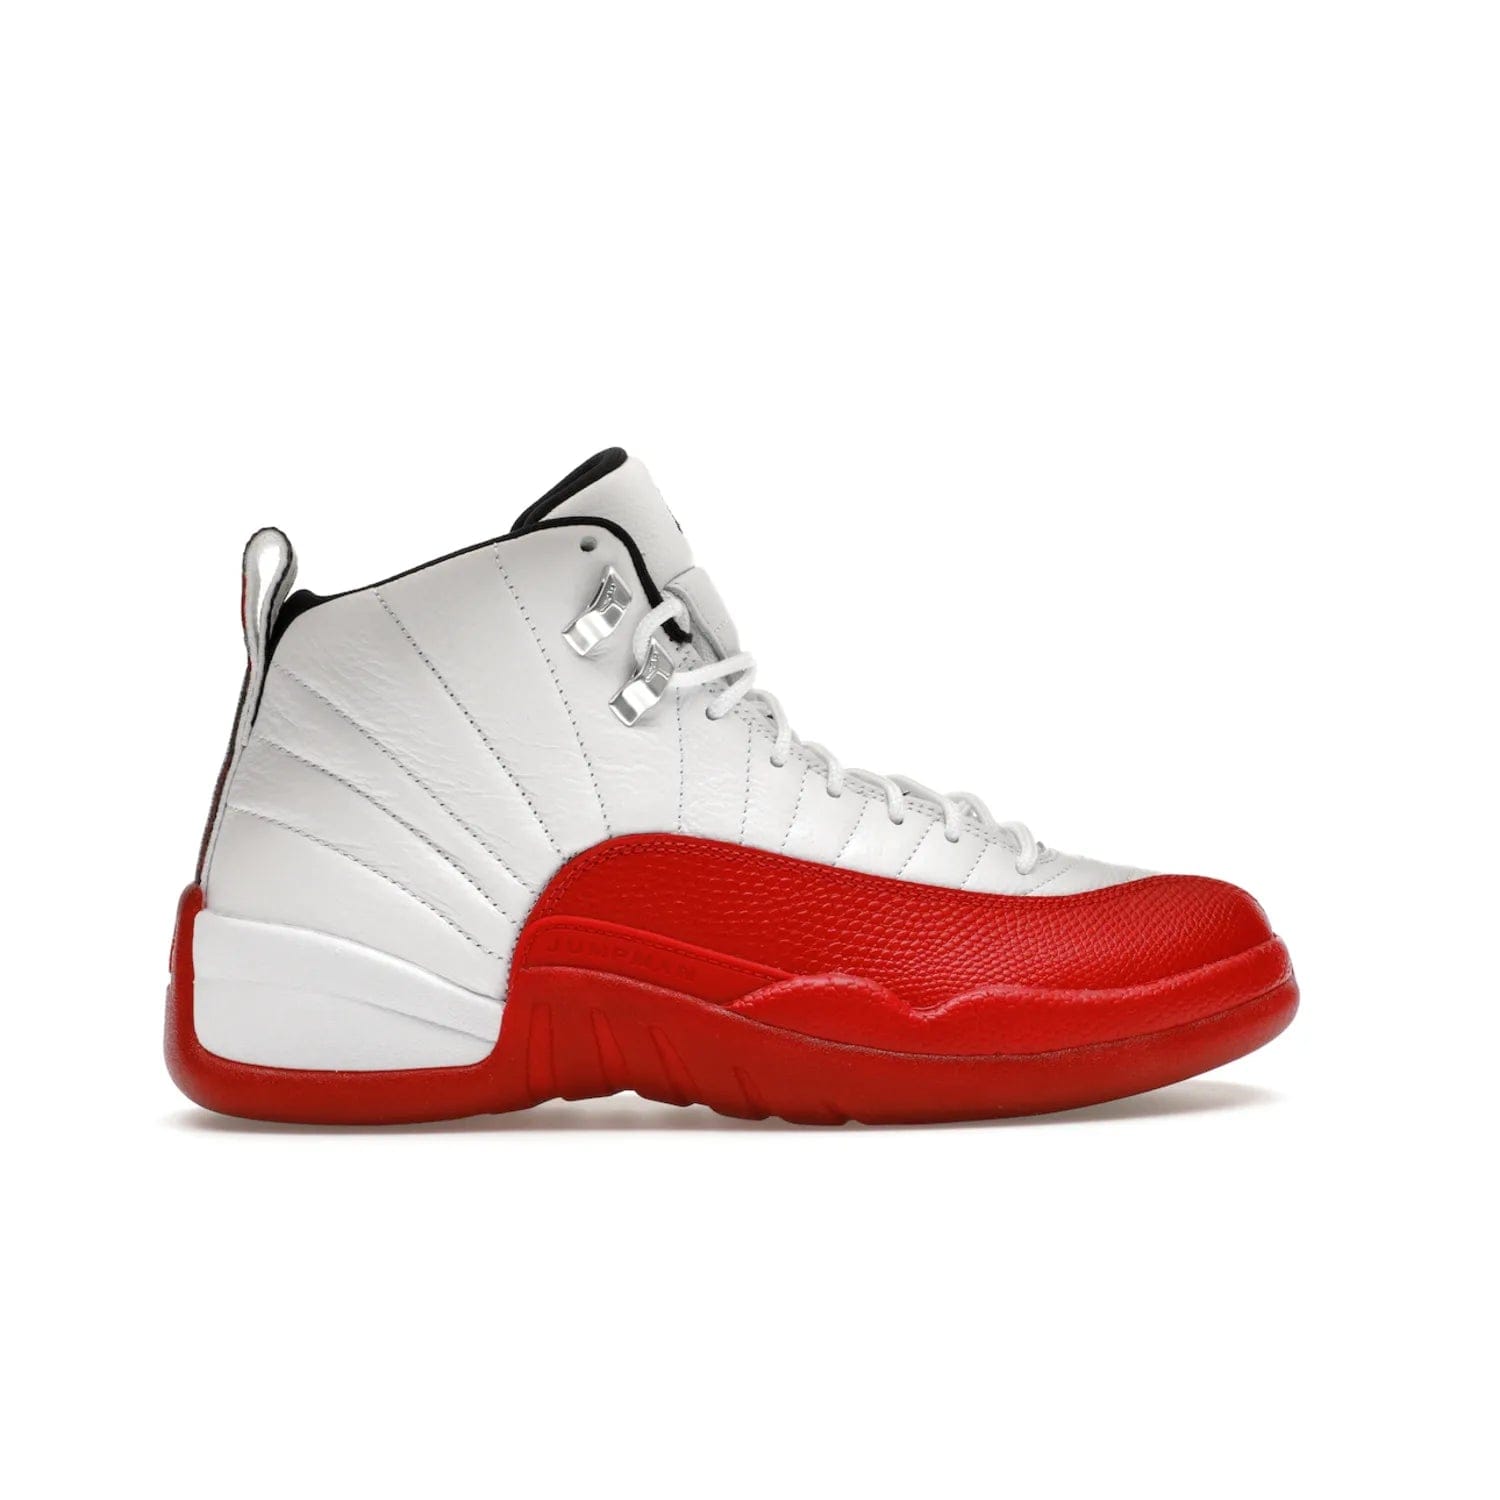 Jordan 12 Retro Cherry (2023) - Image 36 - Only at www.BallersClubKickz.com - Live your sneaker legend with the Jordan 12 Retro Cherry. Iconic pebbled leather mudguards, quilted uppers, and varsity red accents make this 1997 classic a must-have for 2023. Shine on with silver hardware and matching midsoles, and bring it all together for limited-edition style on October 28th. Step into Jordan legacy with the Retro Cherry.